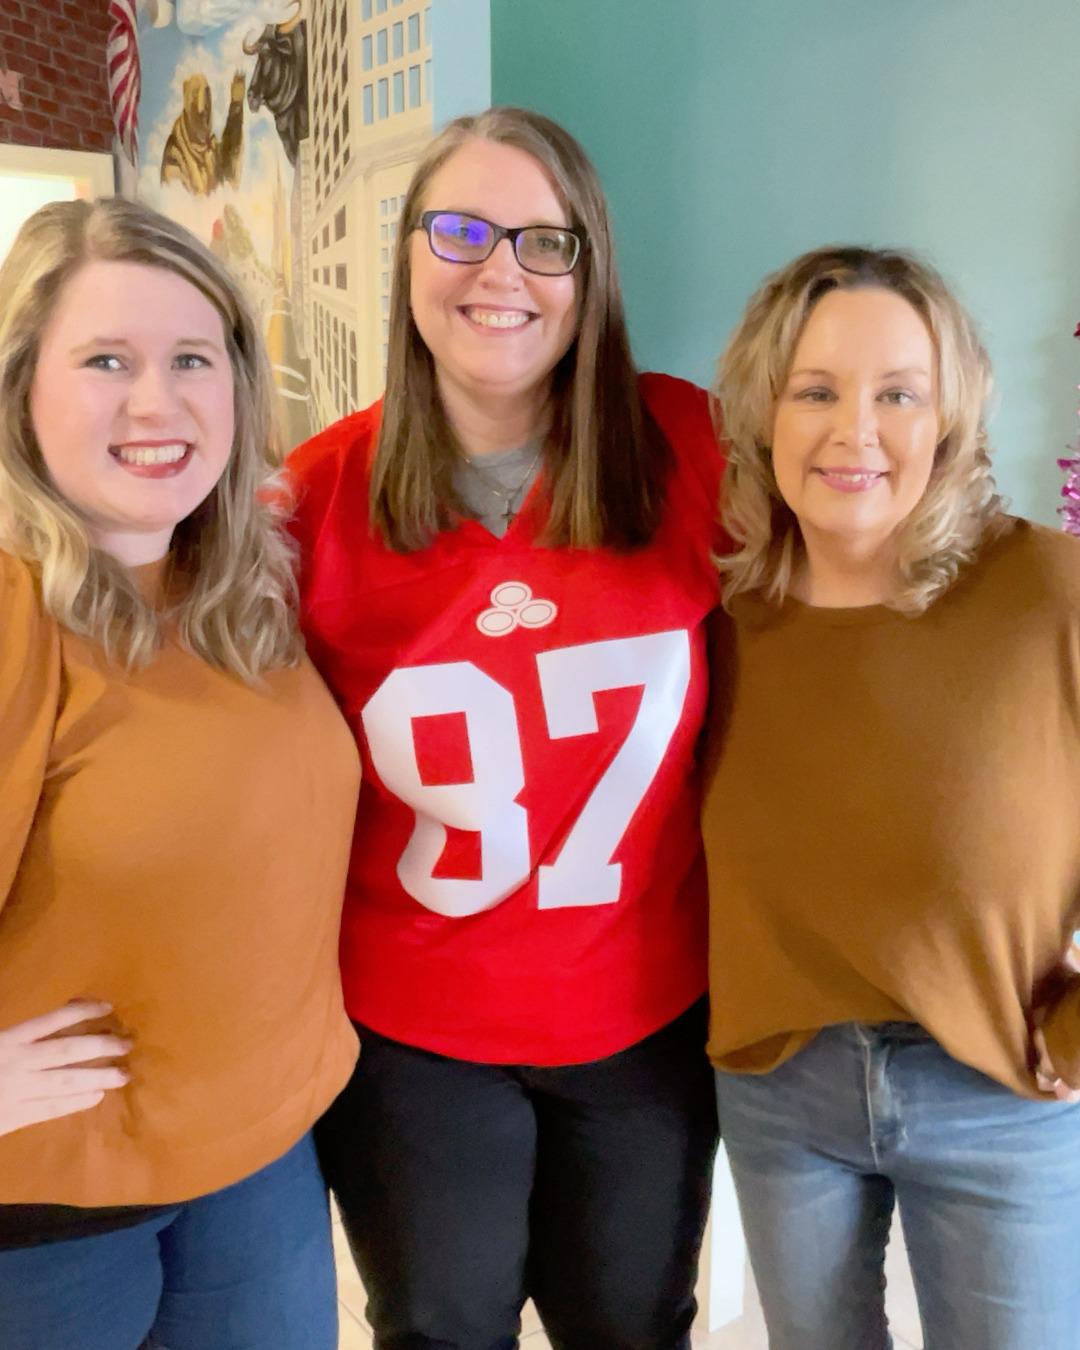 Fridays are for fun outfits & getting ready for some FOOTBALL! 🏈 Right?!? 
Our team is dressed in red & gold today to support Gallatin's own Jordan Mason in the big game this weekend! Good luck!